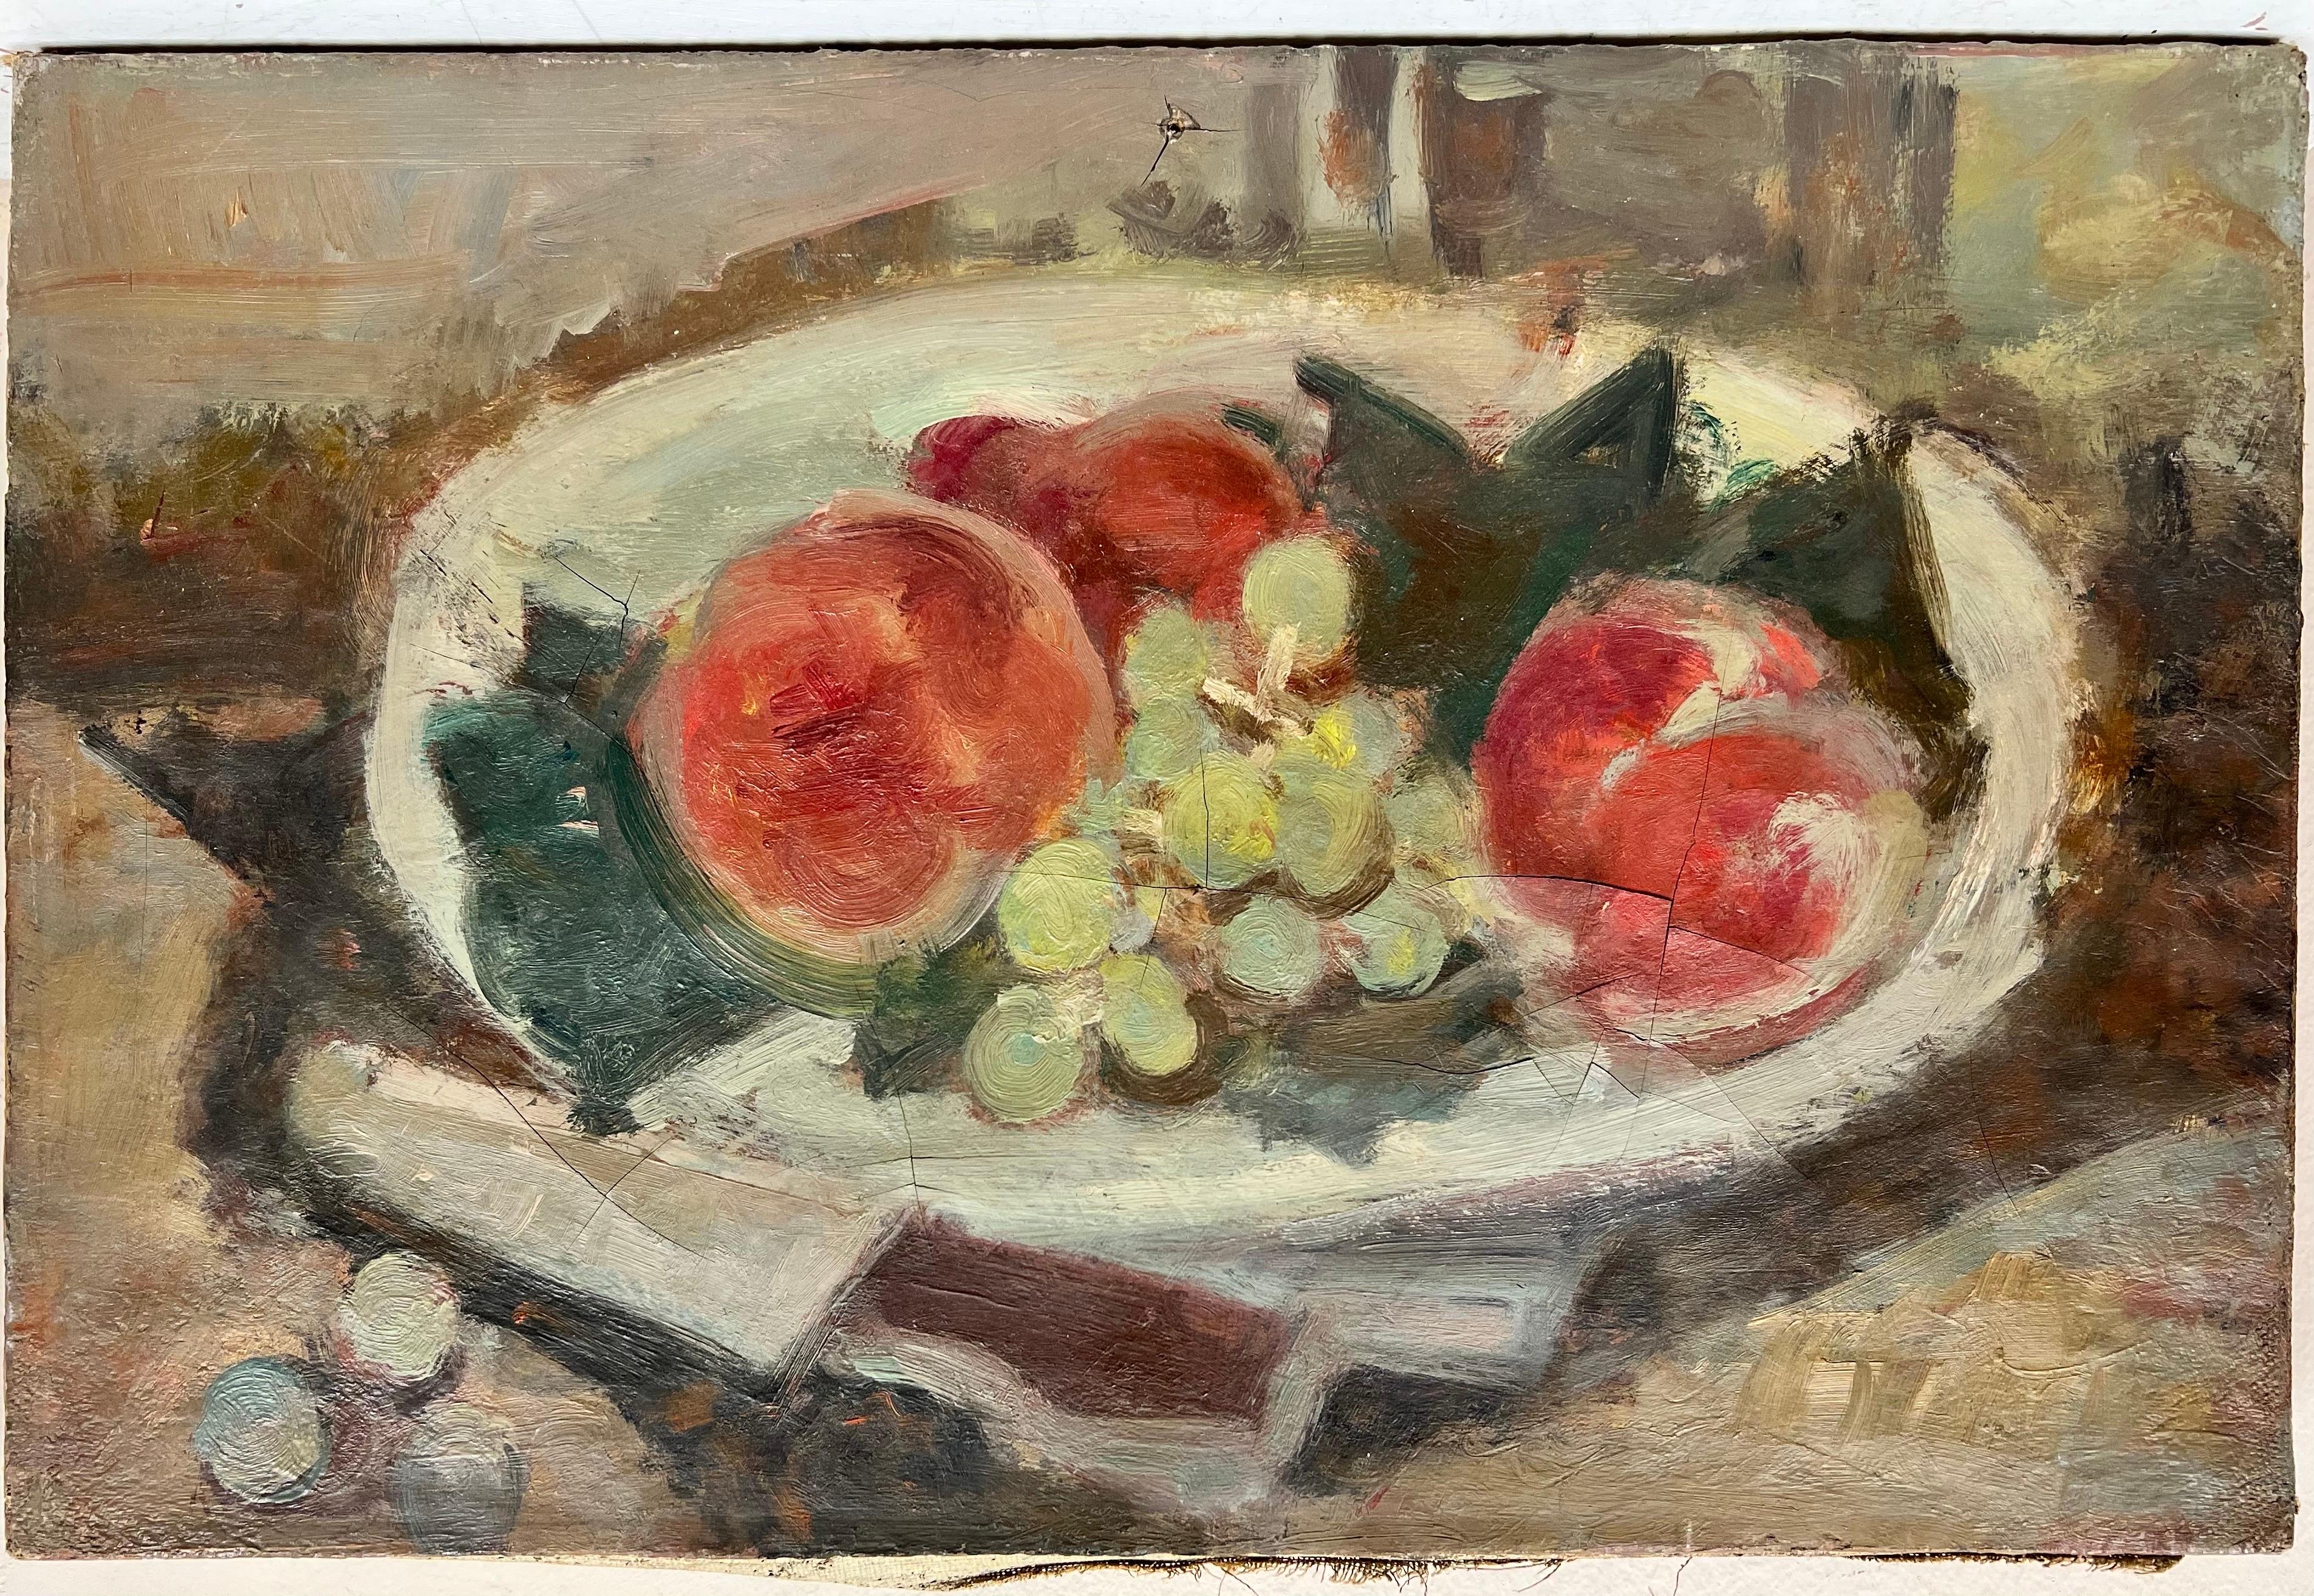 Still Life of Fruit
French School, mid 20th century
oil on canvas
10.5 x 16 inches
provenance: private collection, France
The painting is in sound condition but very much showing the signs of age; small hole to the upper centre which looks like a